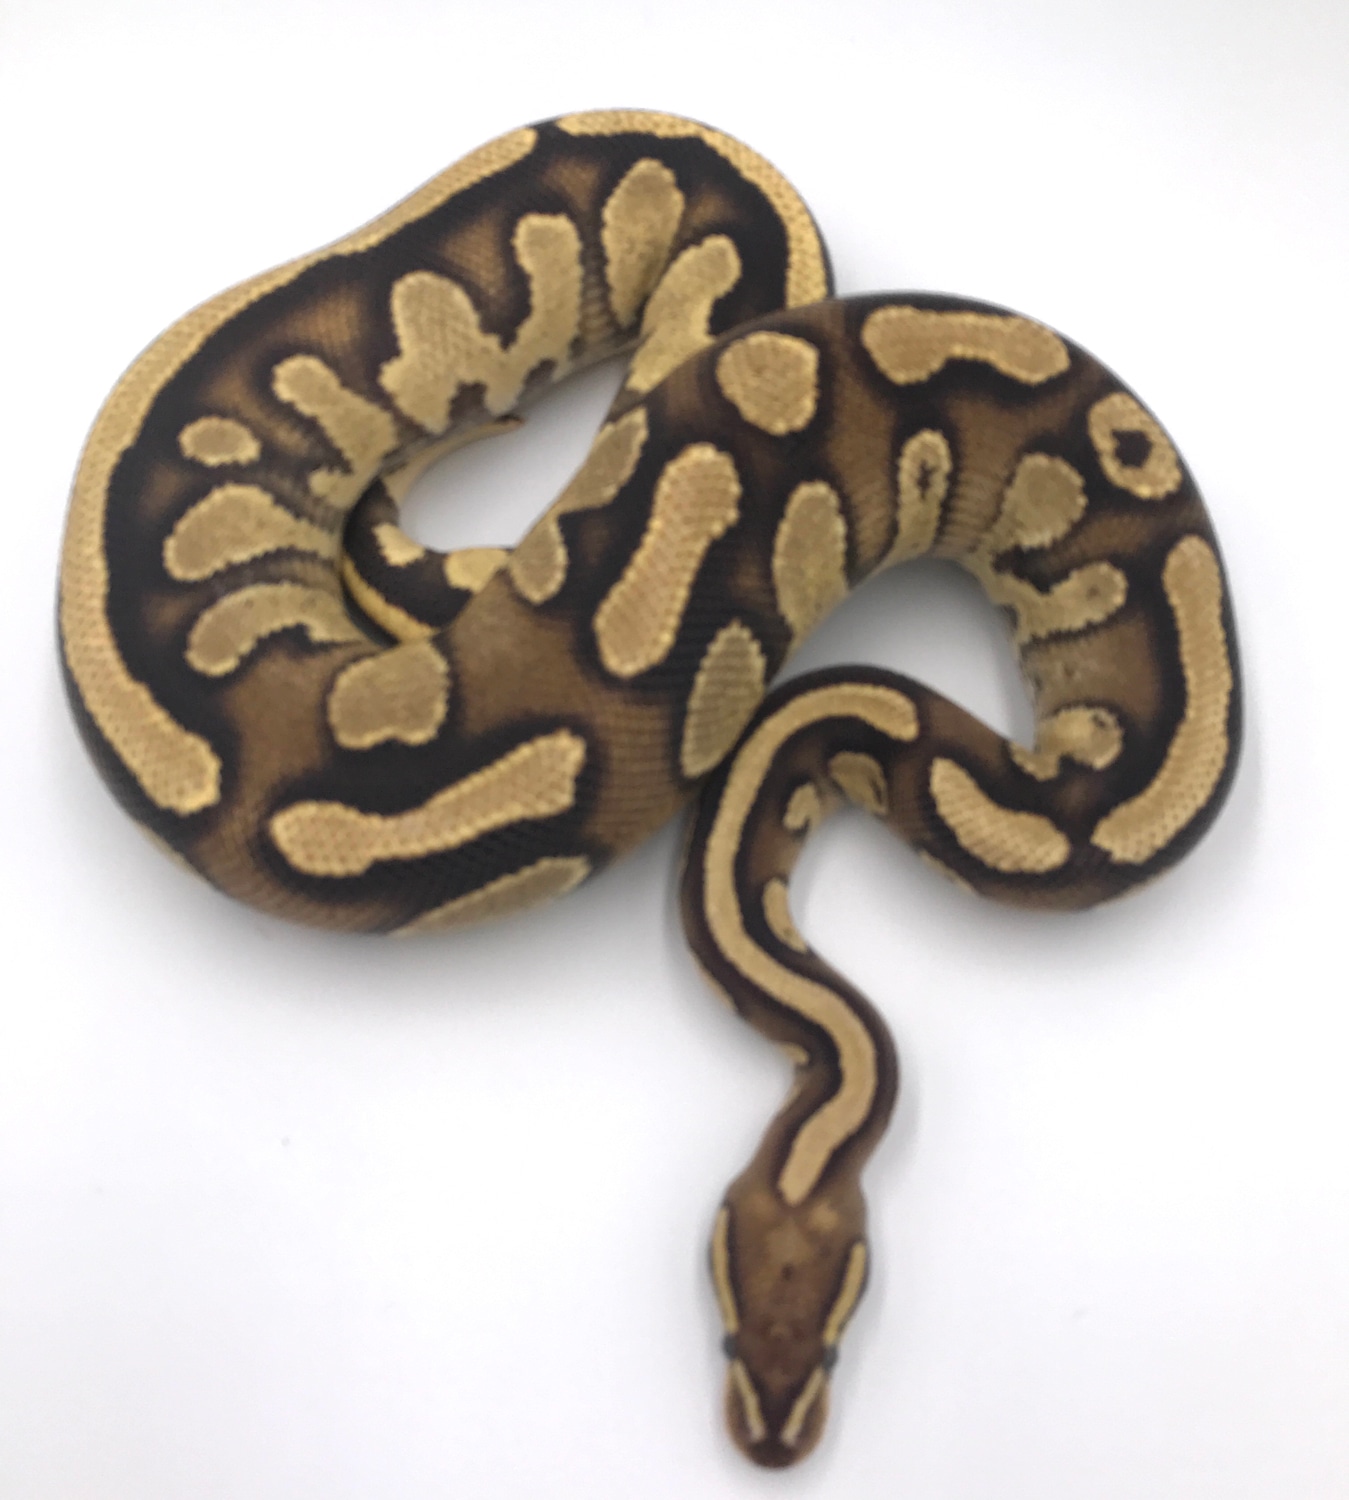 1Fire Wrecking Het Pied Ball Python by Wreck room snakes